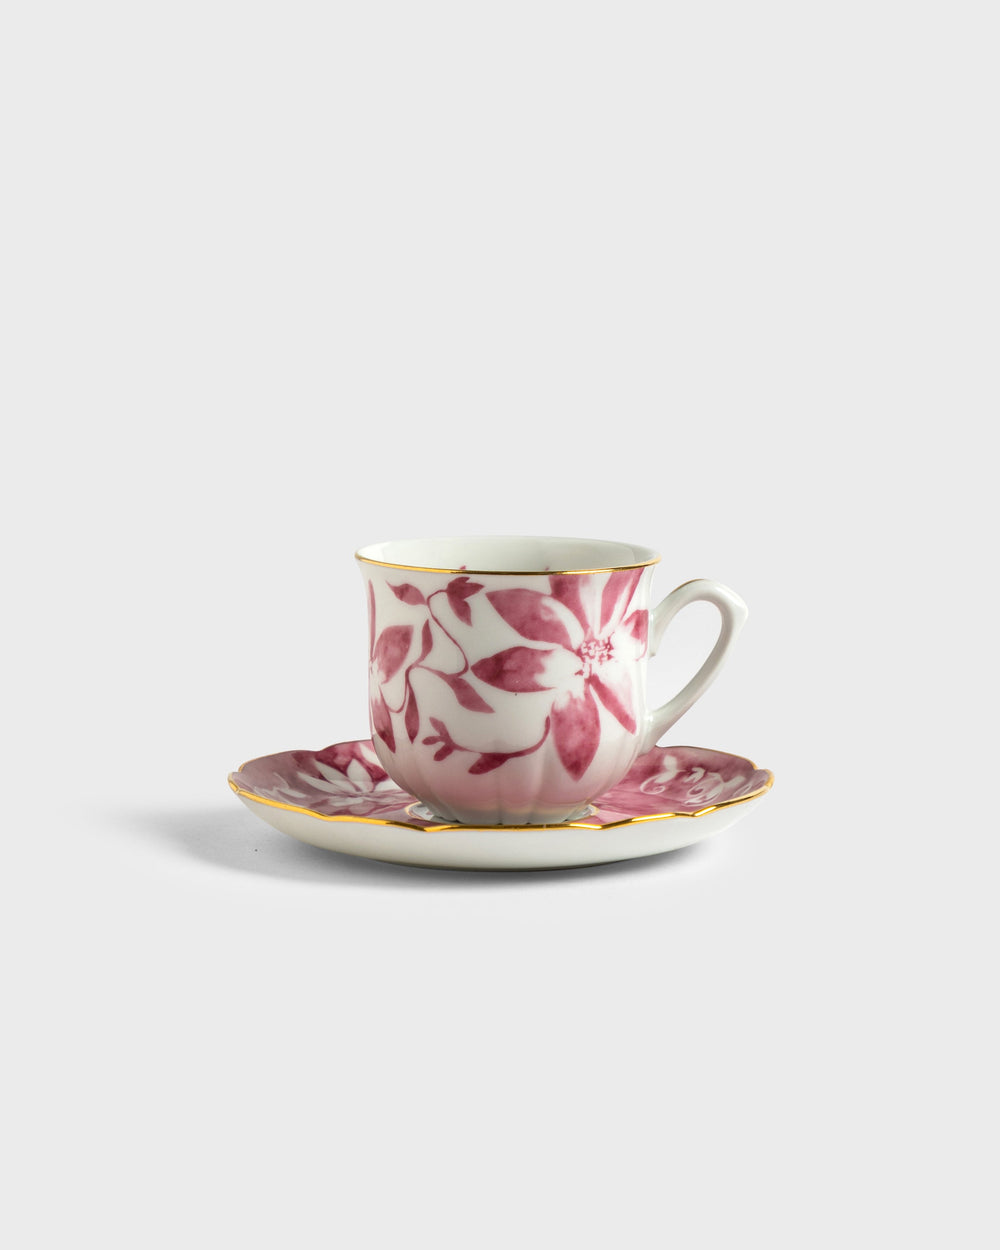 Tania Bulhoes Espresso Cup and Saucer Fenix